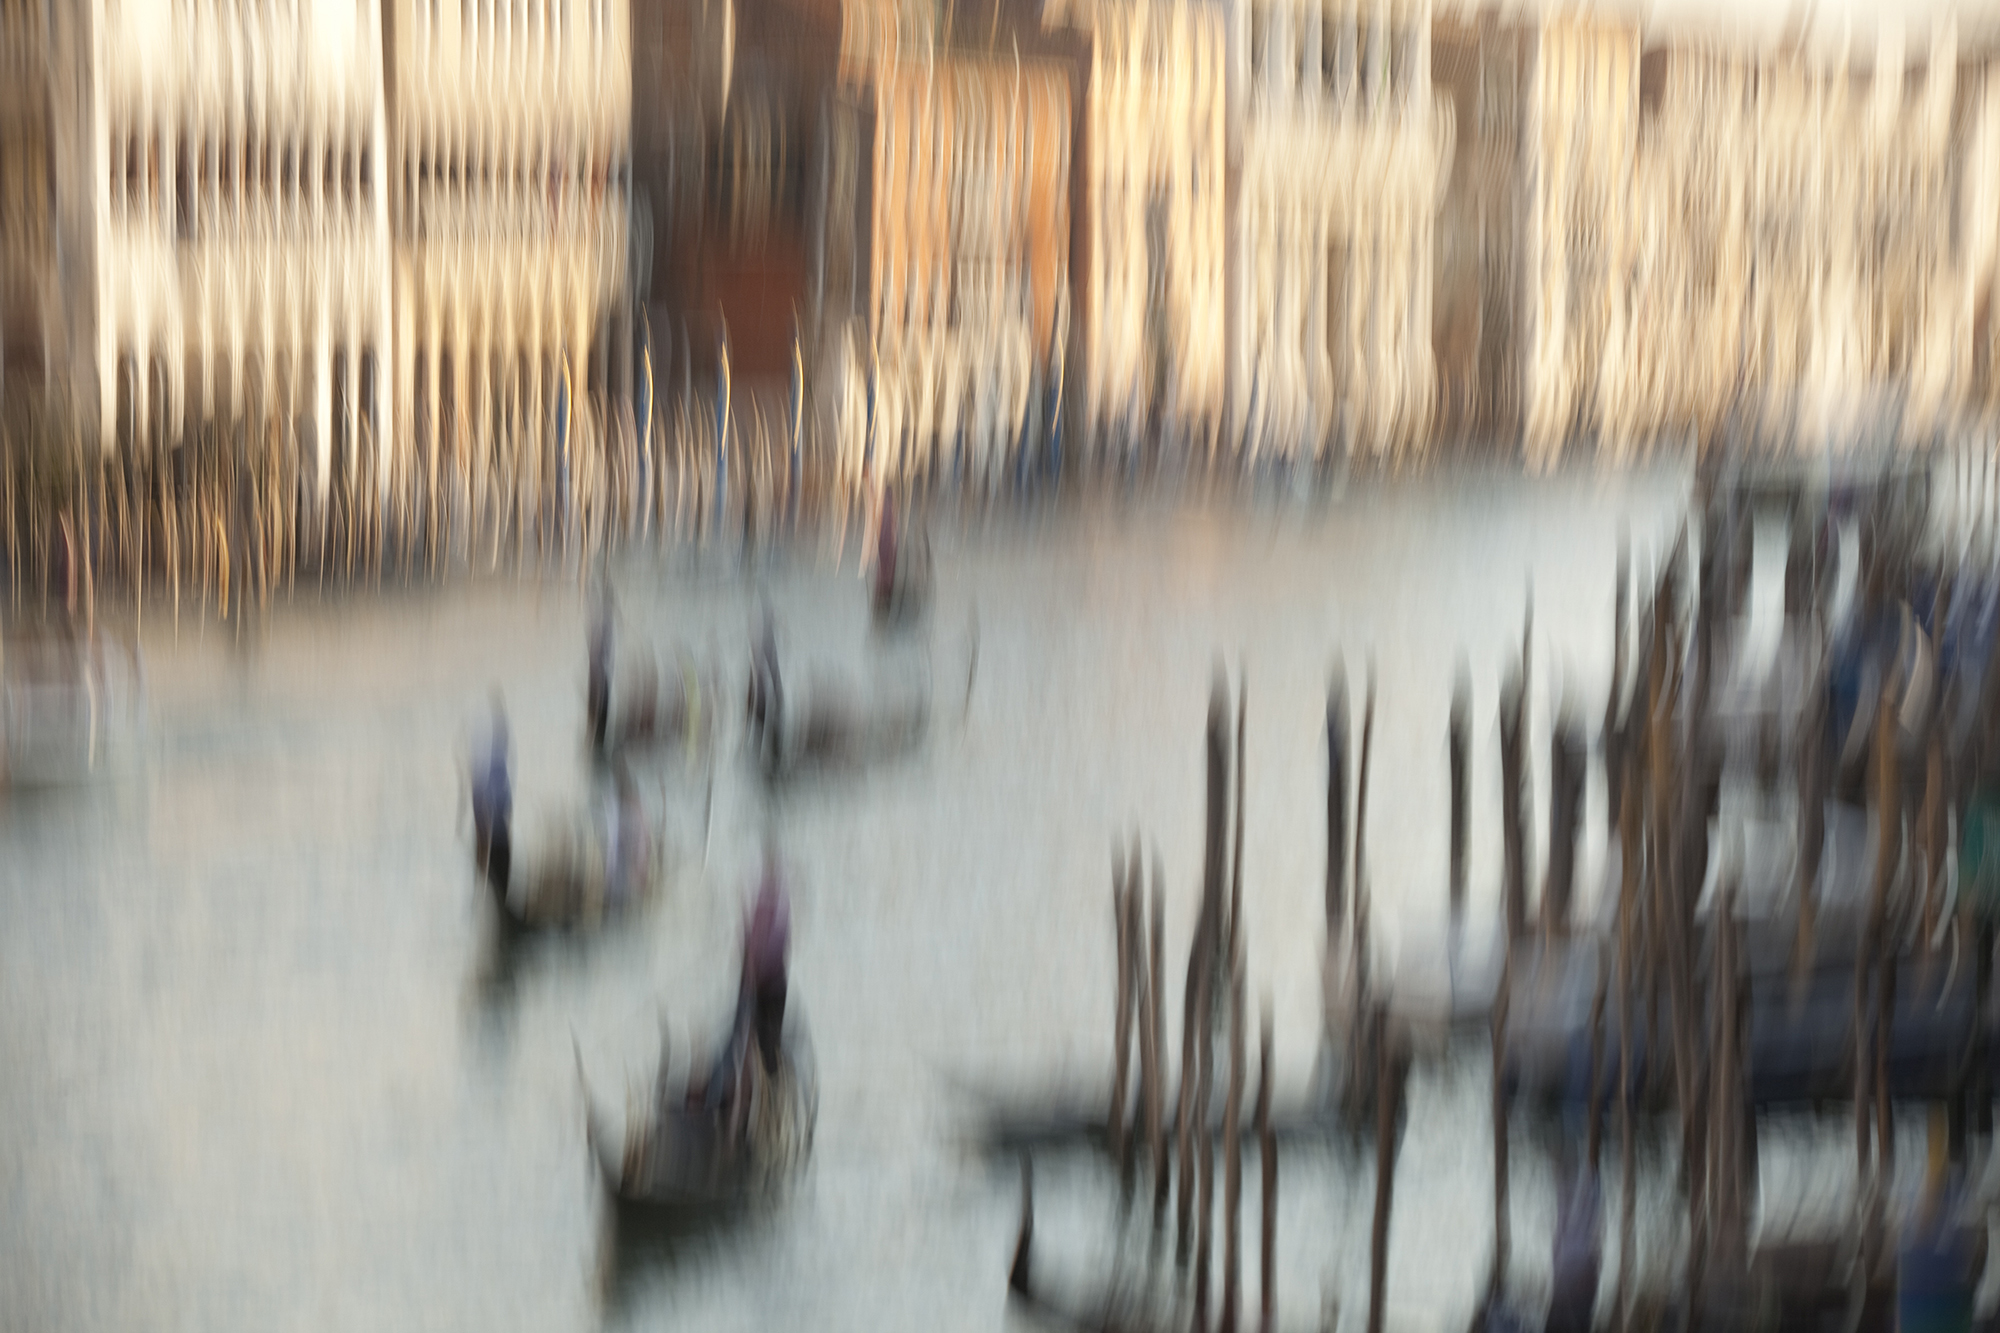 Hommage to Canaletto. Venice, 2012